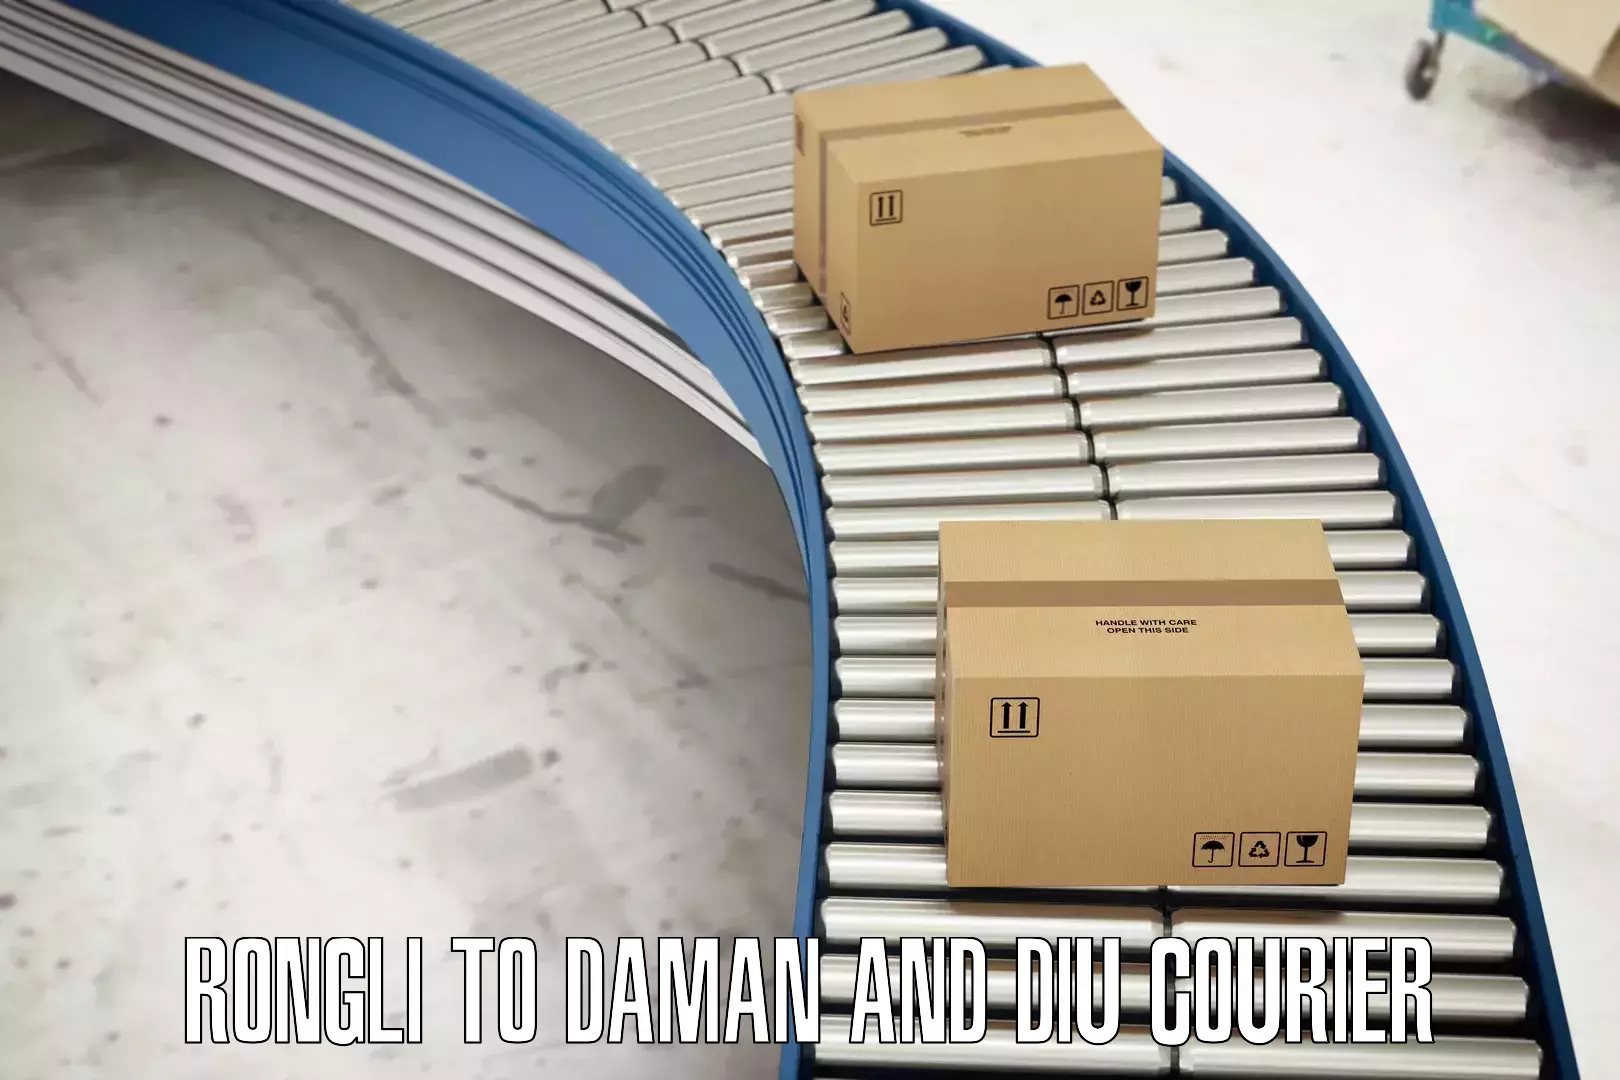 Discount courier rates Rongli to Daman and Diu